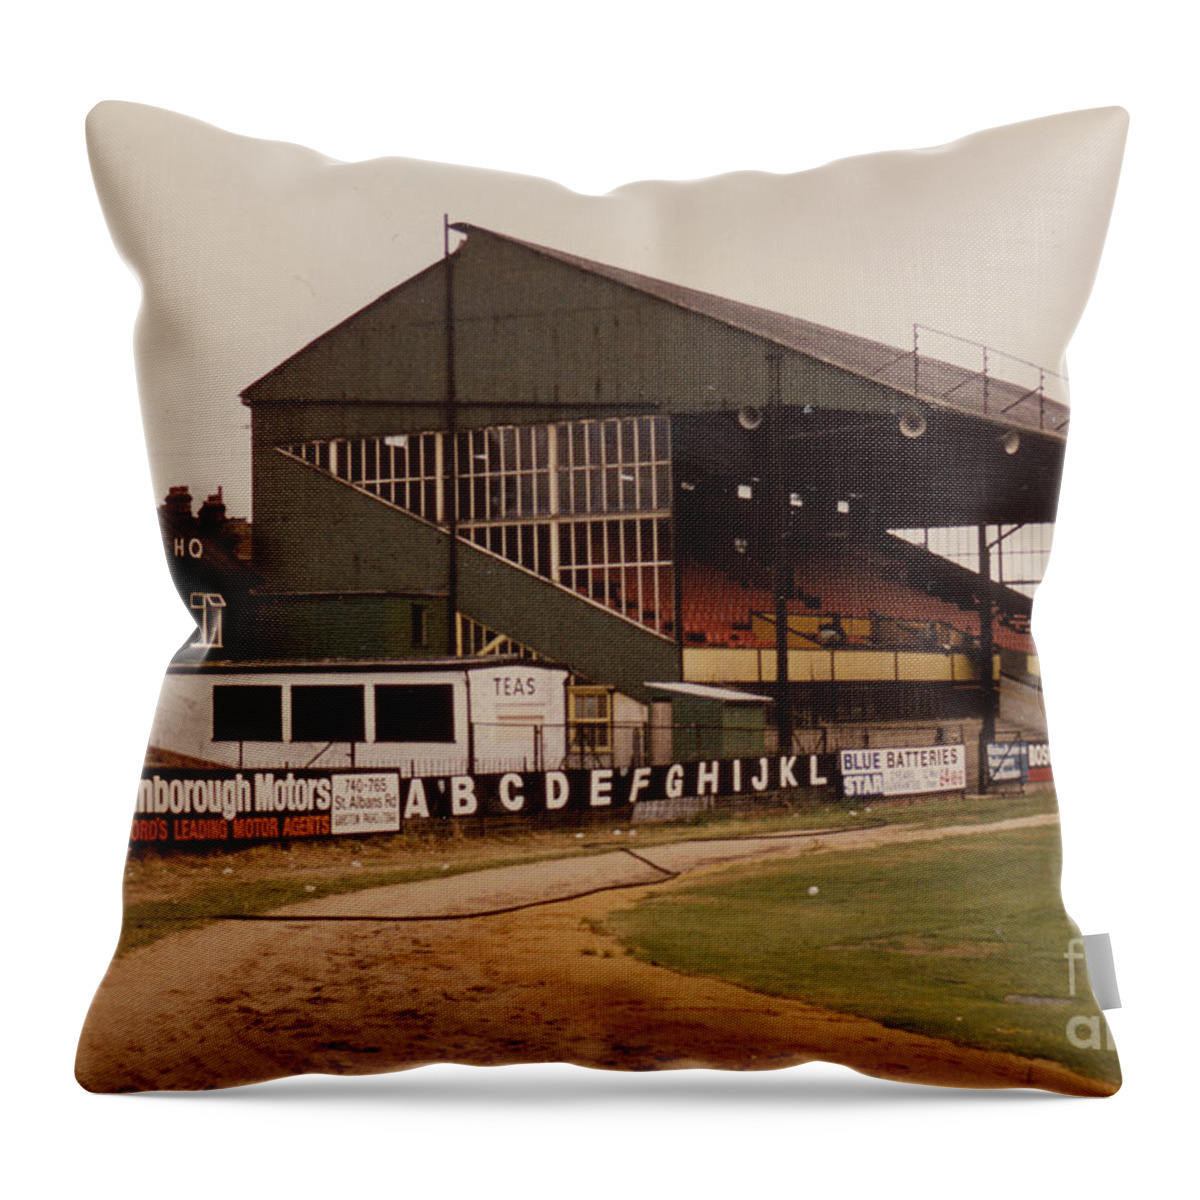  Throw Pillow featuring the photograph Watford - Vicarage Road - Main Stand 1 - 1969 by Legendary Football Grounds